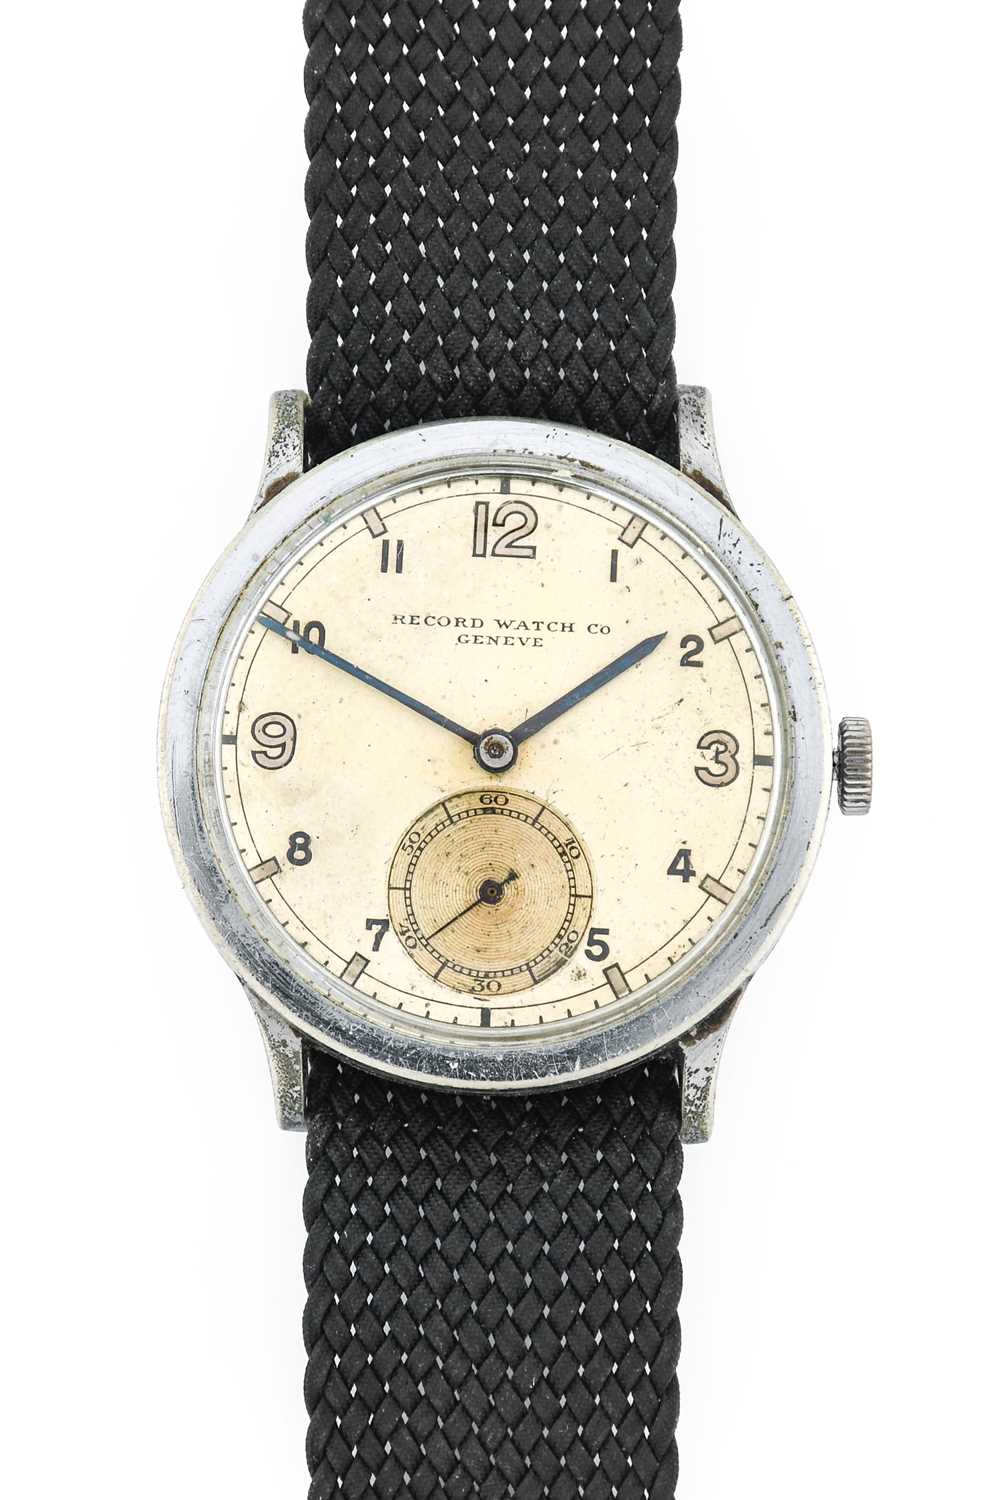 Record: A Chrome Plated Wristwatch, signed Record Watch Co, Geneve, circa 1935, (calibre 22)